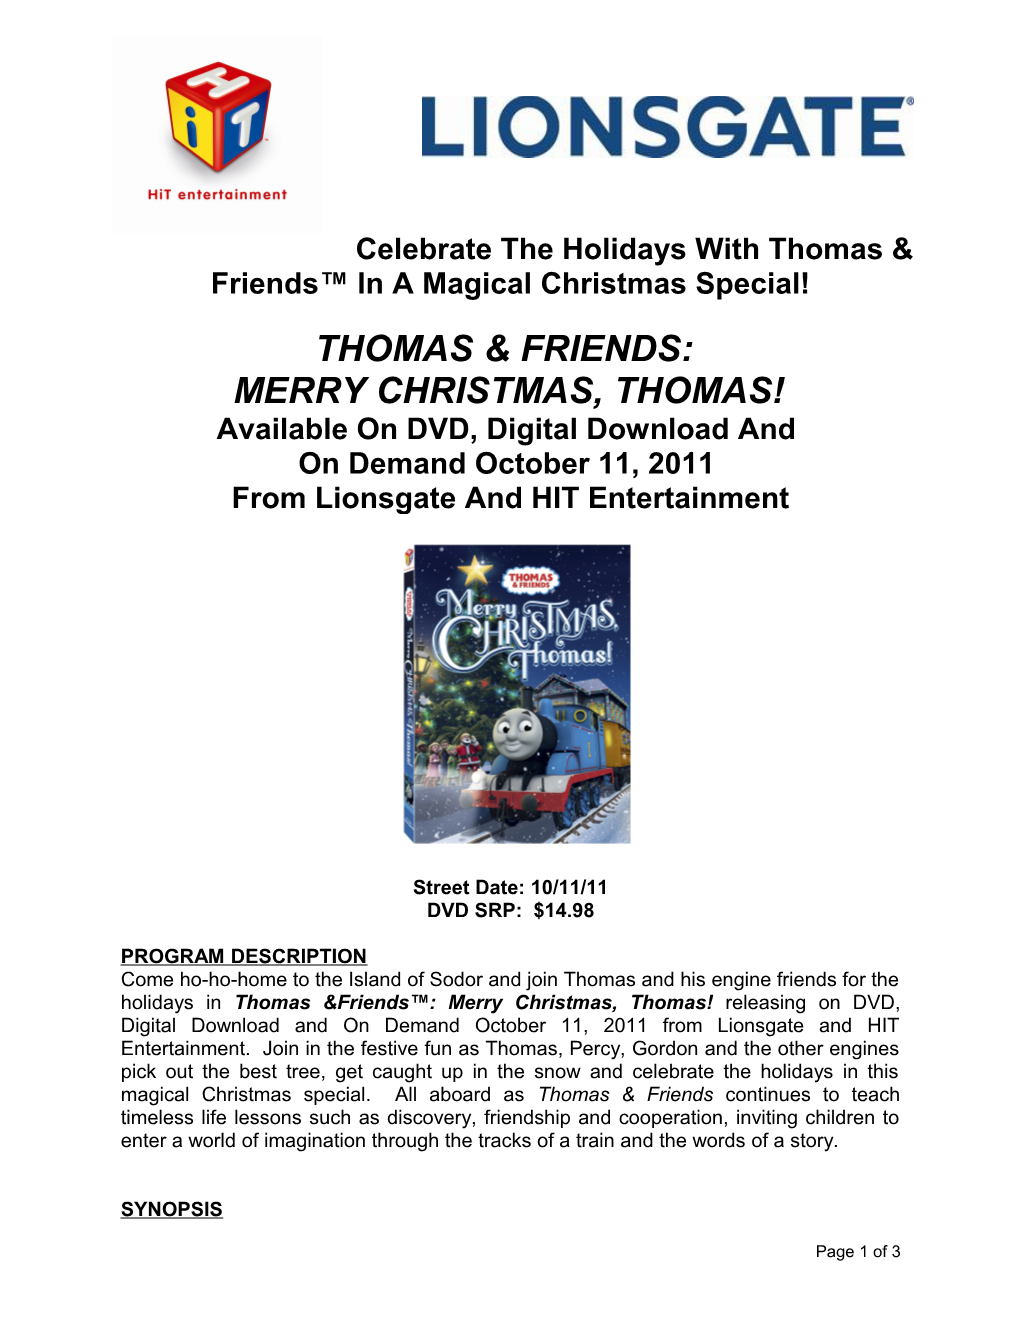 Celebrate the Holidays with Thomas & Friends in a Magical Christmas Special!